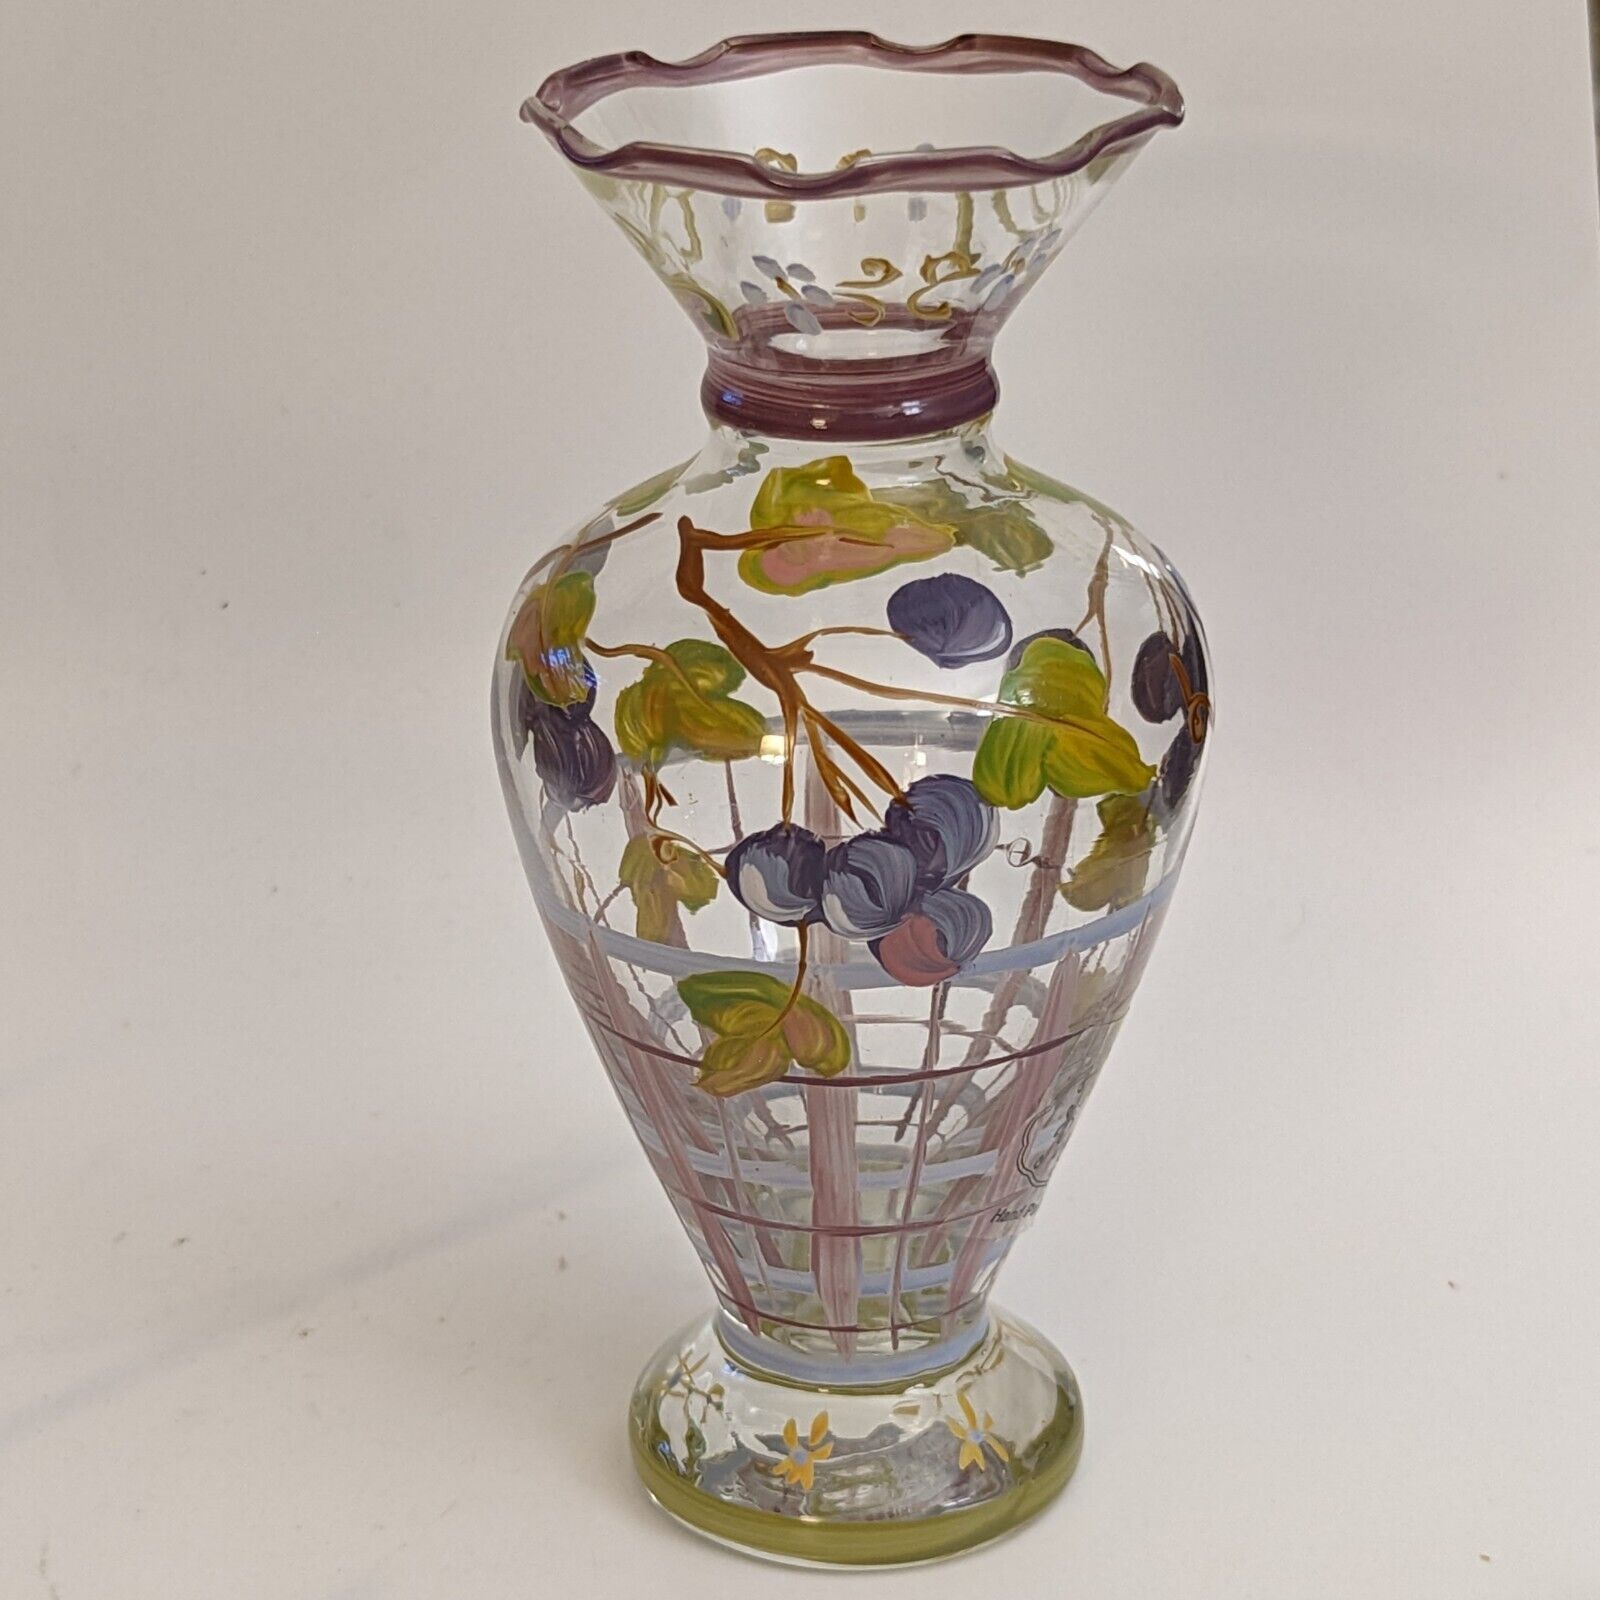 Tracey Porter Hand Painted Glass Bud Vase Grapes and Leaves Purples Yellow Brown